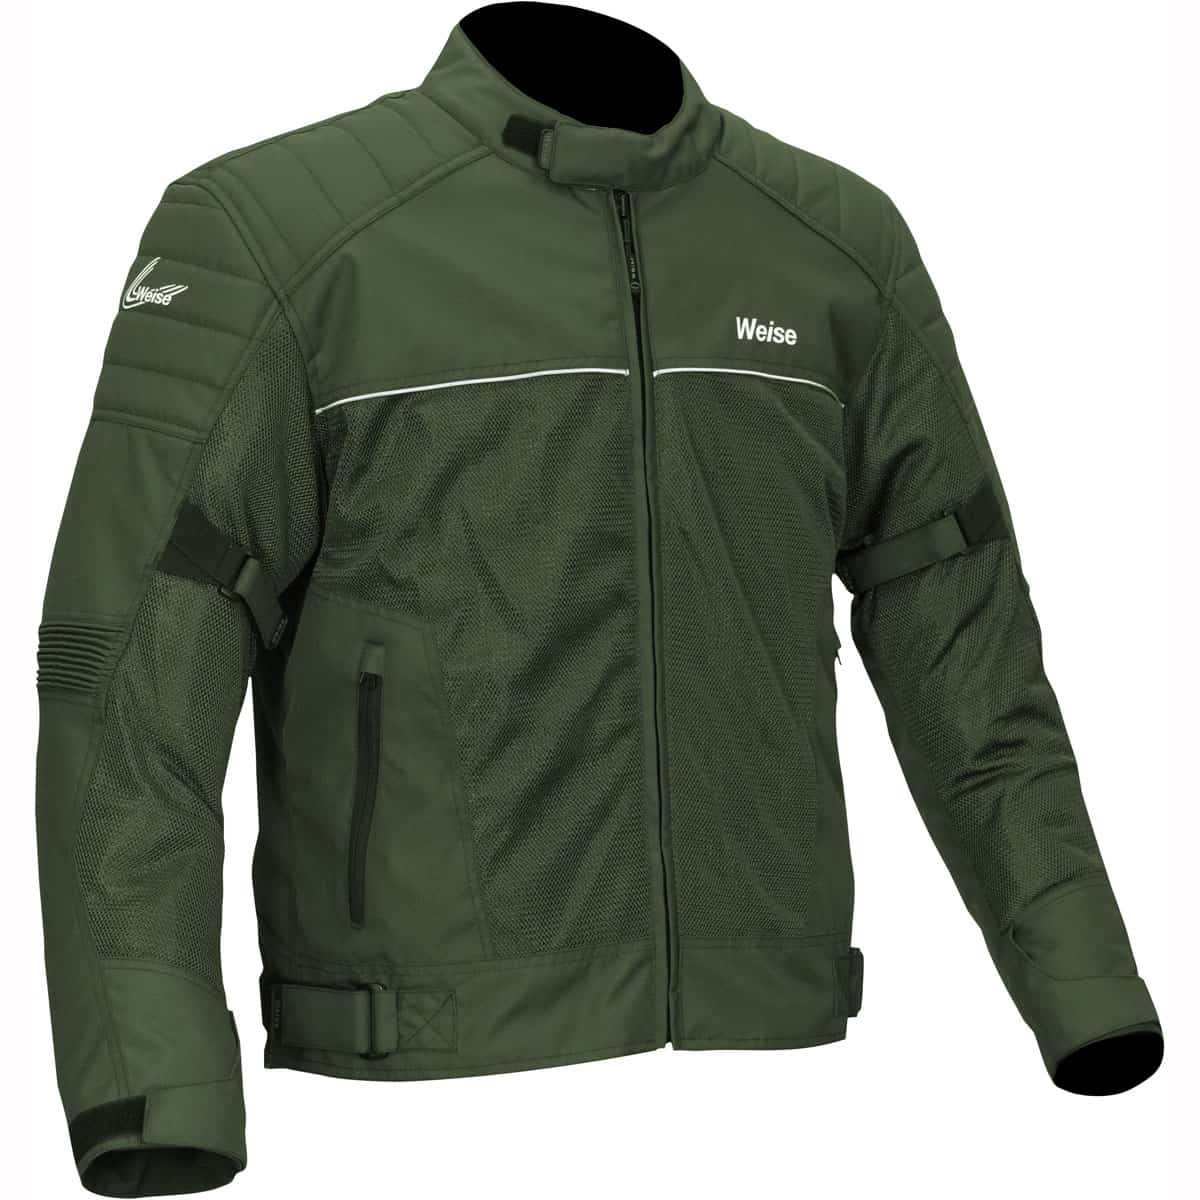 Weise Scout mesh motorcycle jacket green right